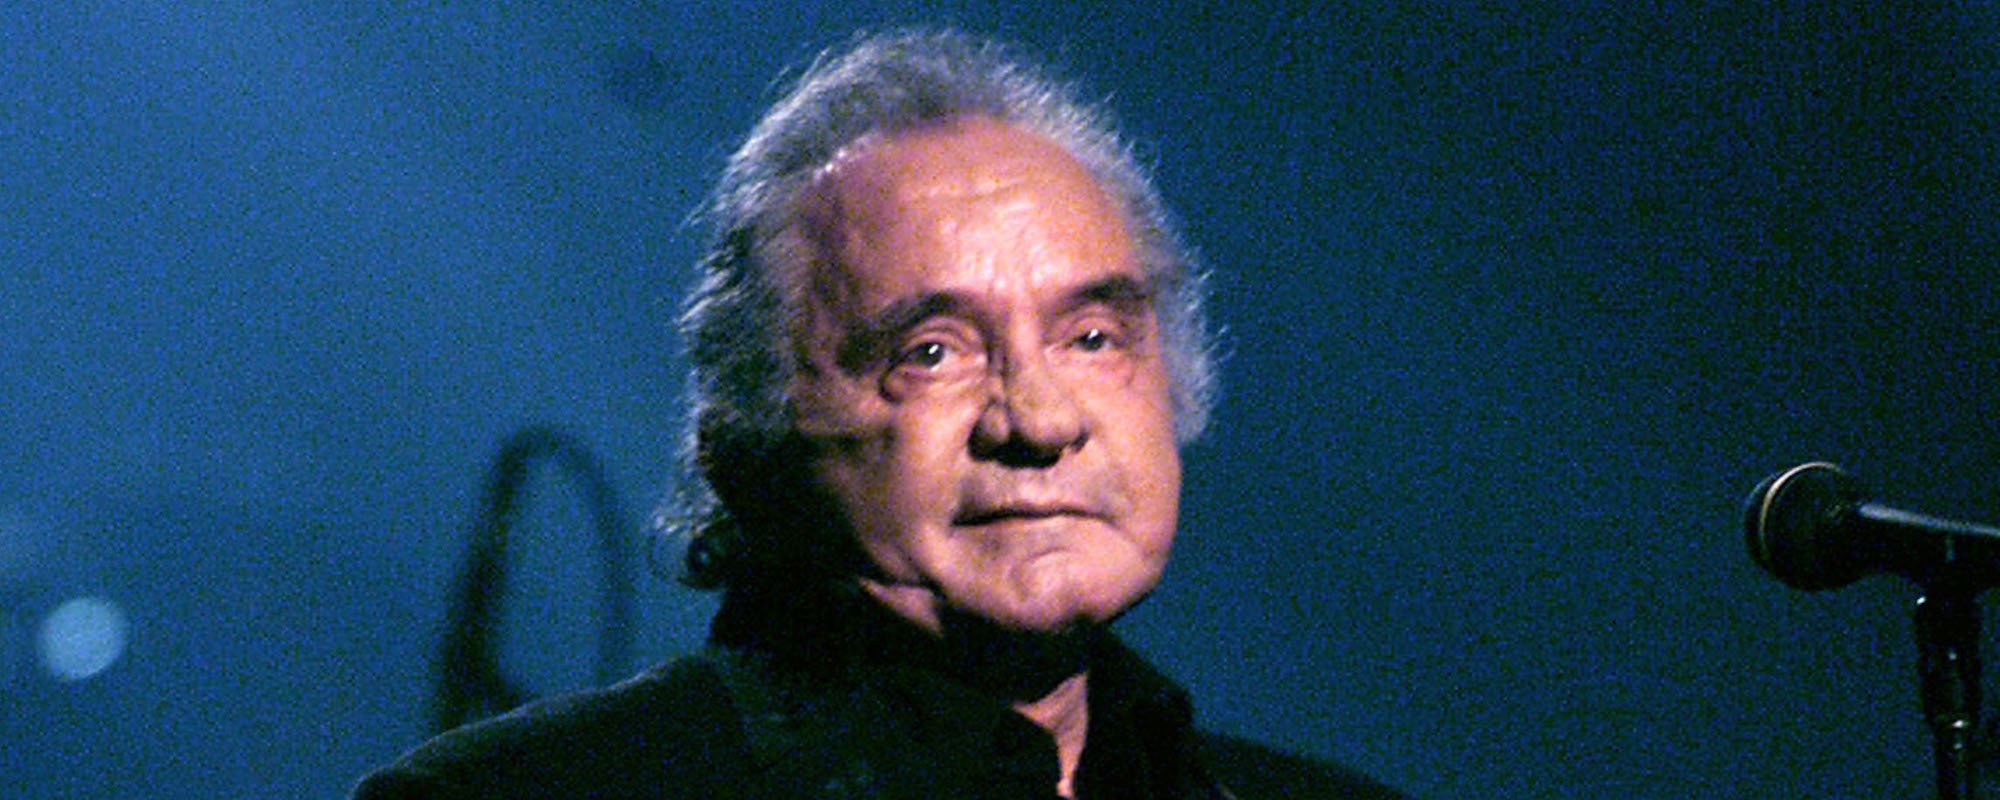 3 Songs by Johnny Cash That Will Make You Cry